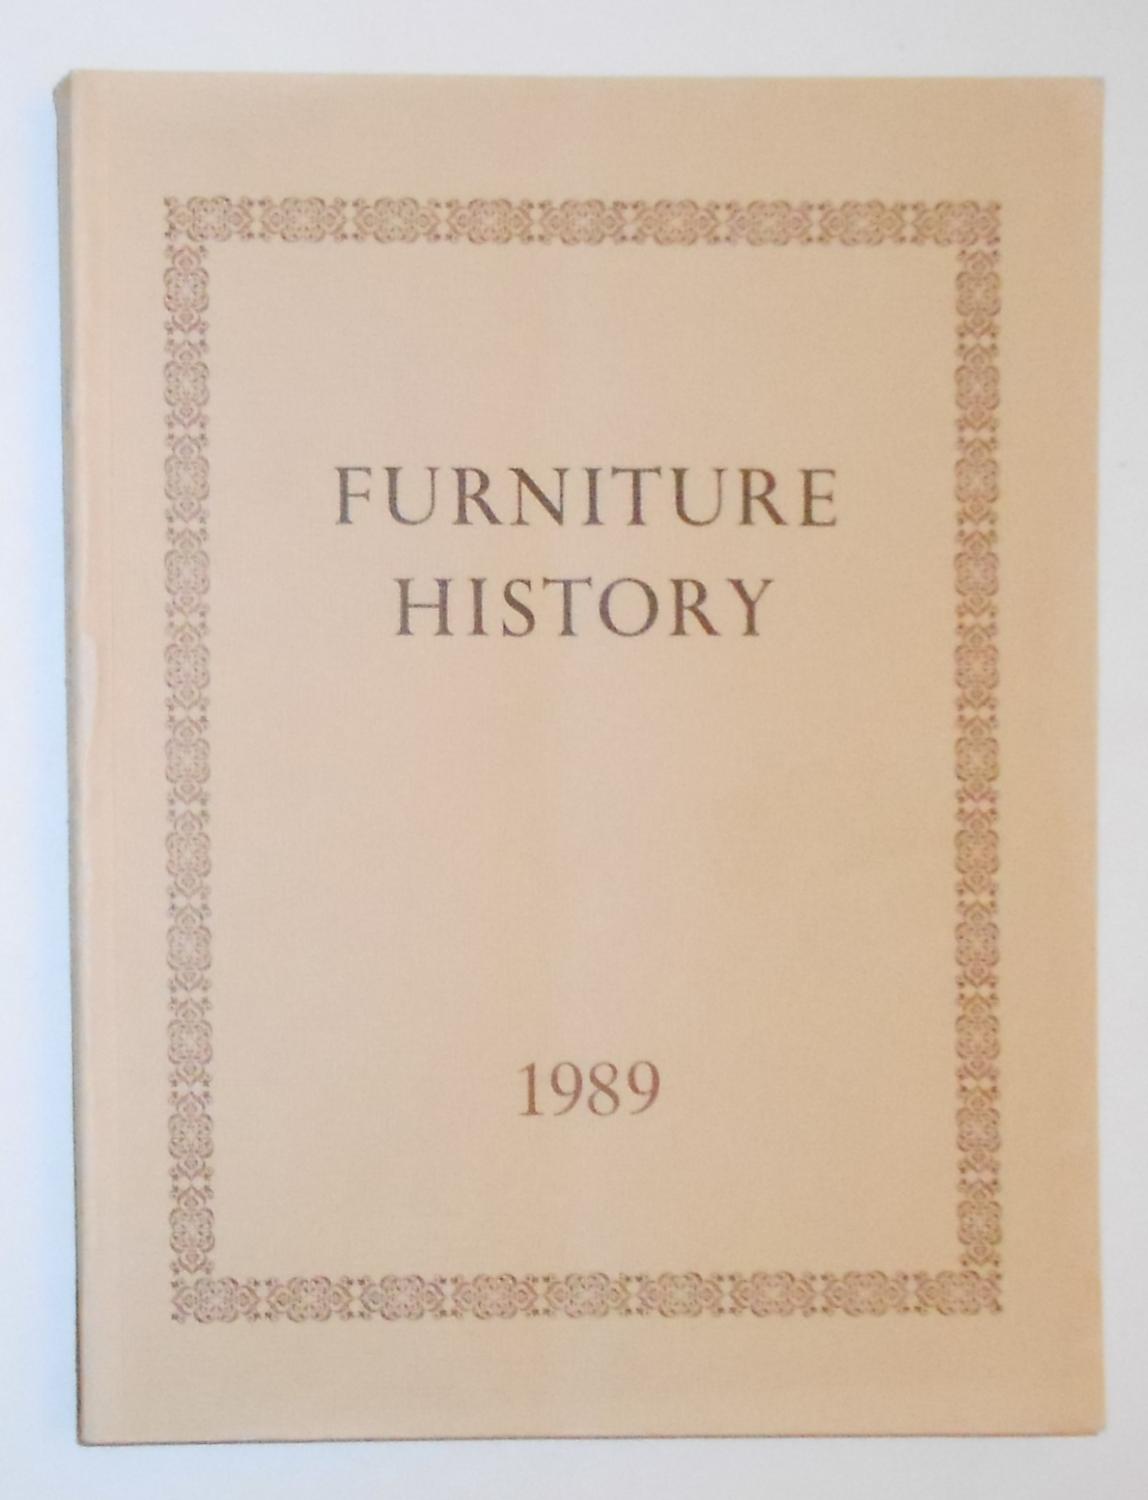 Furniture History - The Journal of the Furniture History Society Volume ...